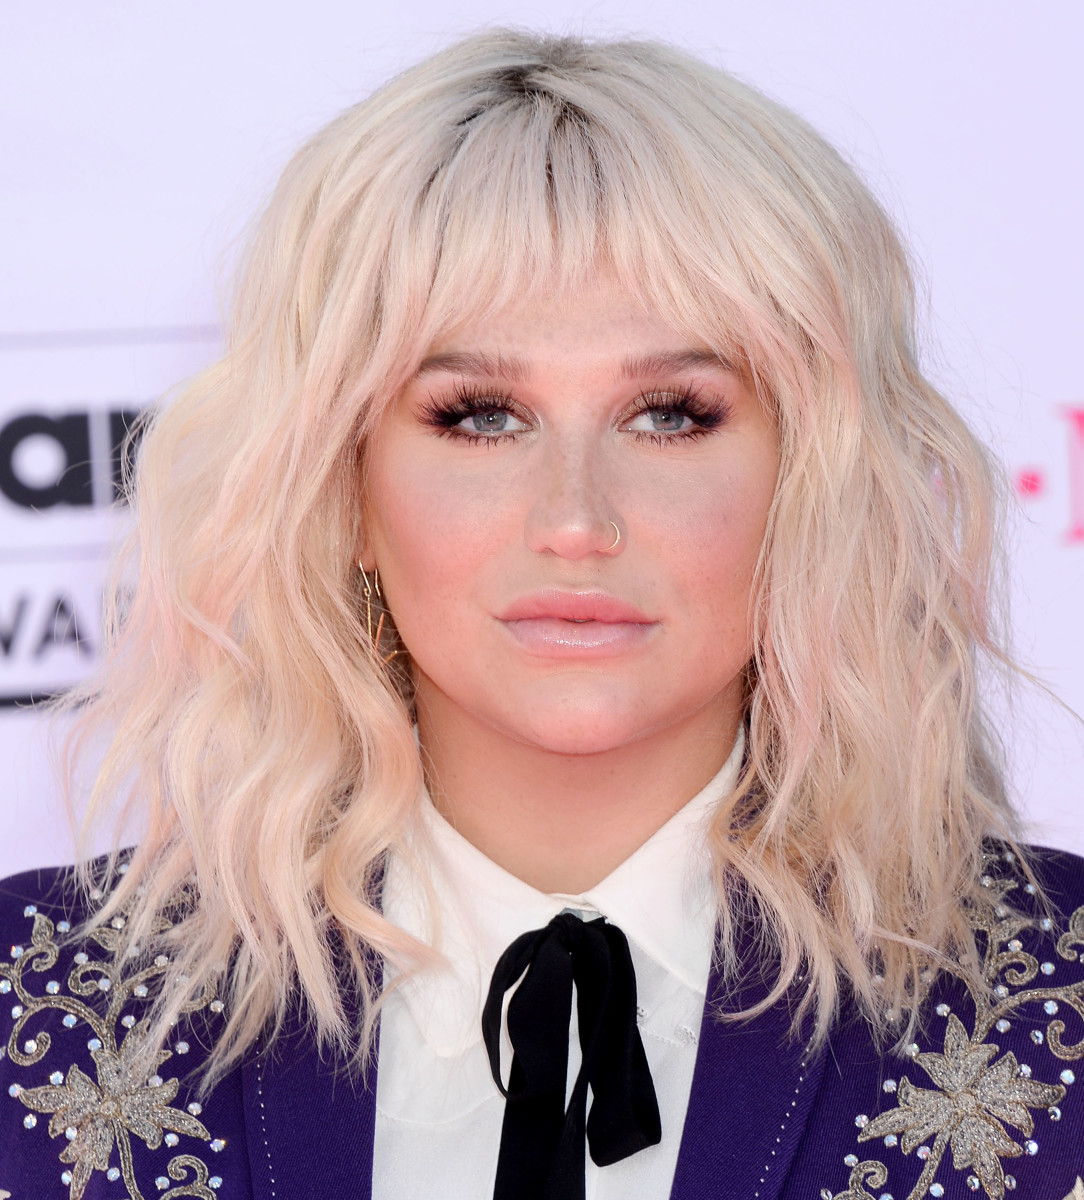 Billboard Music Awards 2016: The Best Celebrity Beauty Looks on the Red Carpet